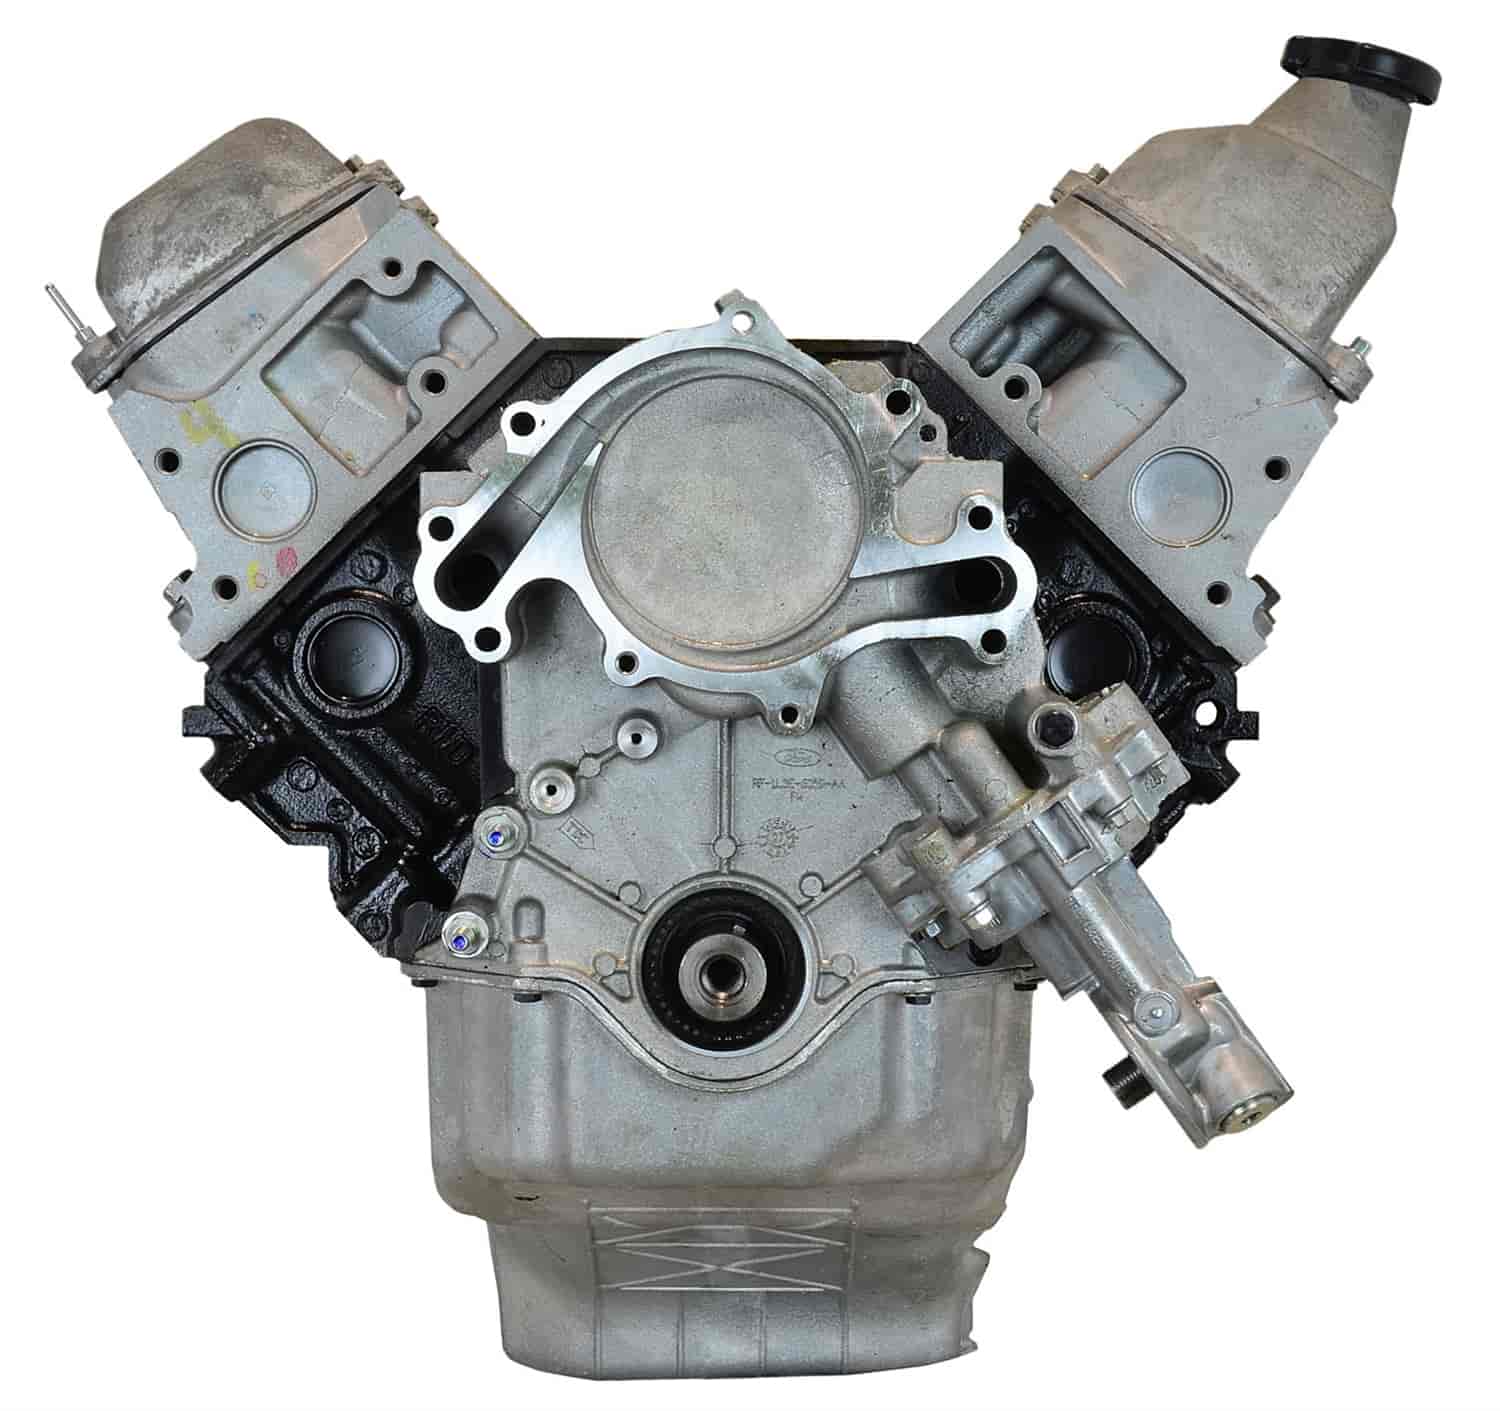 Remanufactured Crate Engine for 1997-1998 Ford F-Series Truck & E-Series Van with 4.2L V6